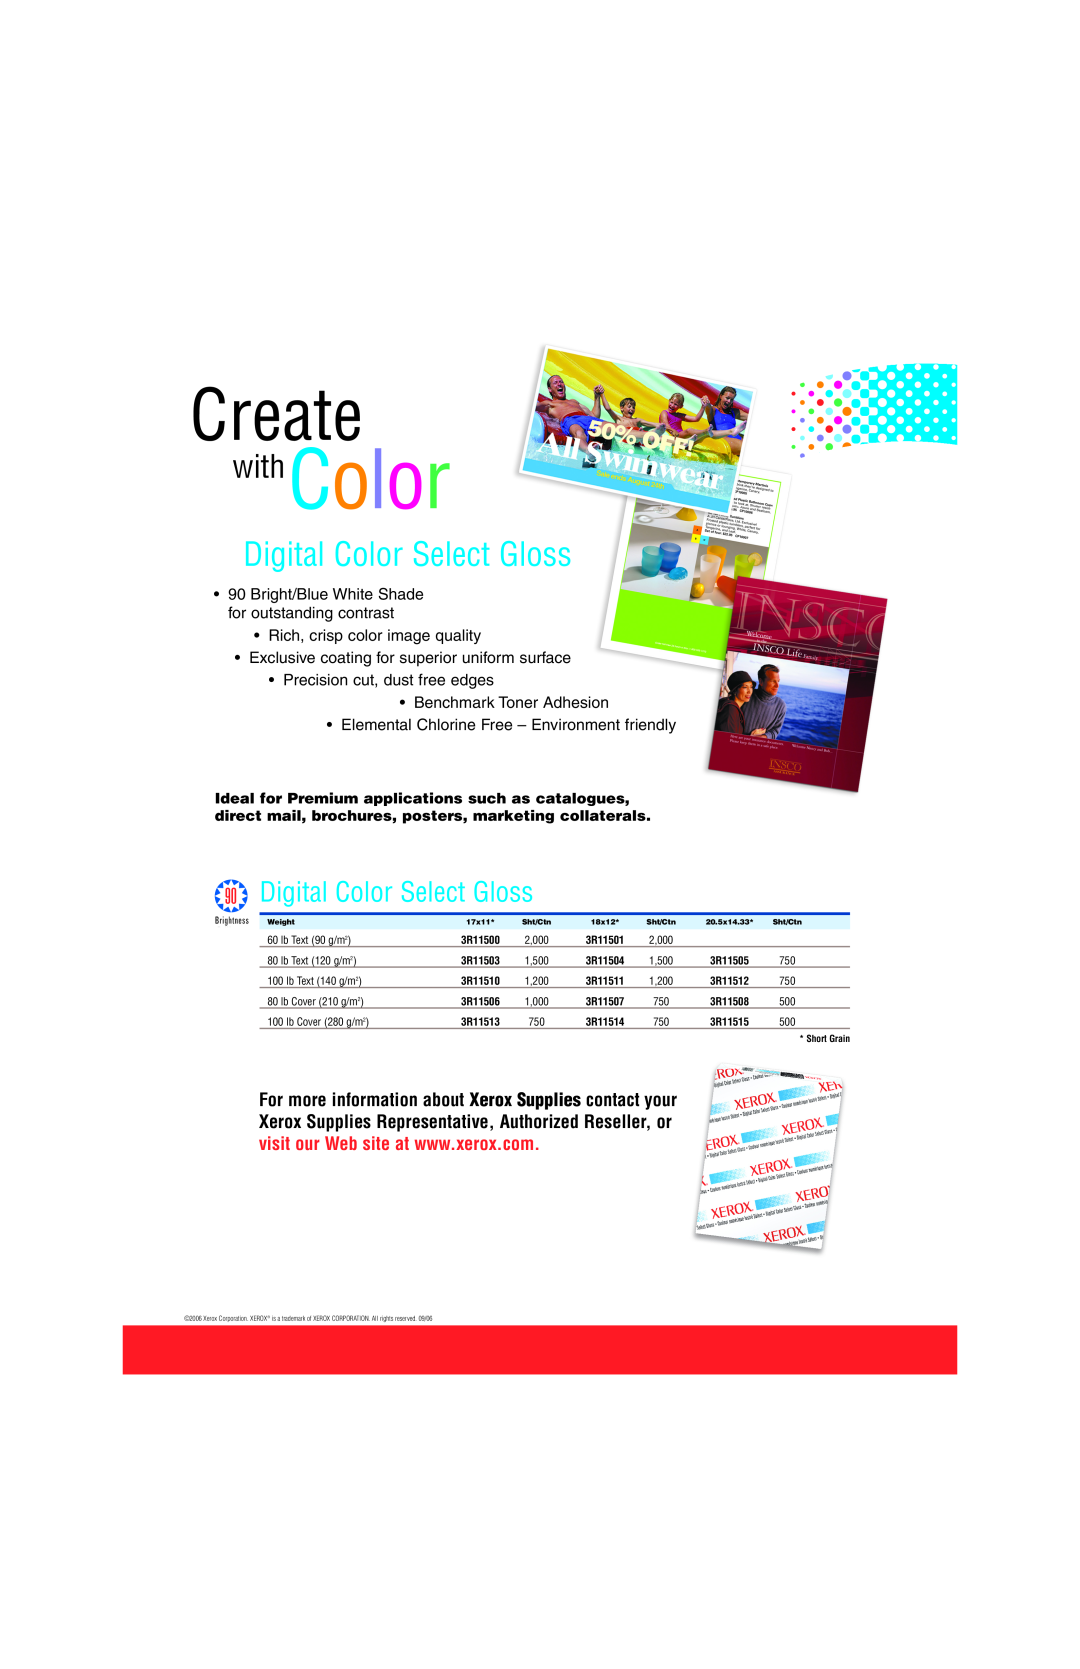 Xerox 3R11506, 3R11511 Create, Digital Color Select Gloss, withColor, Bright/Blue White Shade for outstanding contrast 